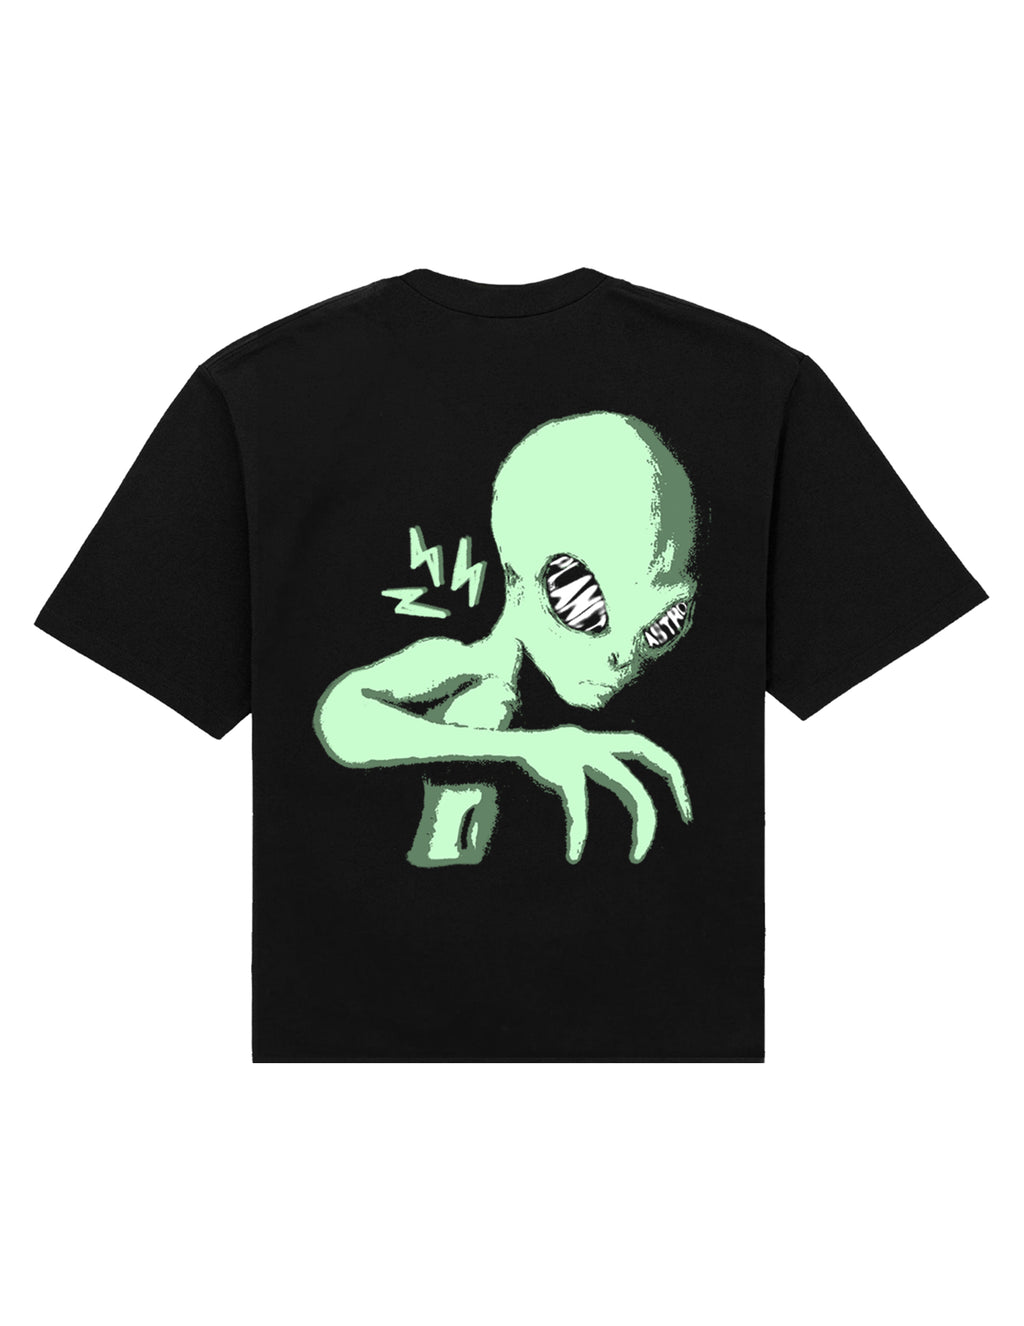 Syndrome Glow in the Dark Tee – Black